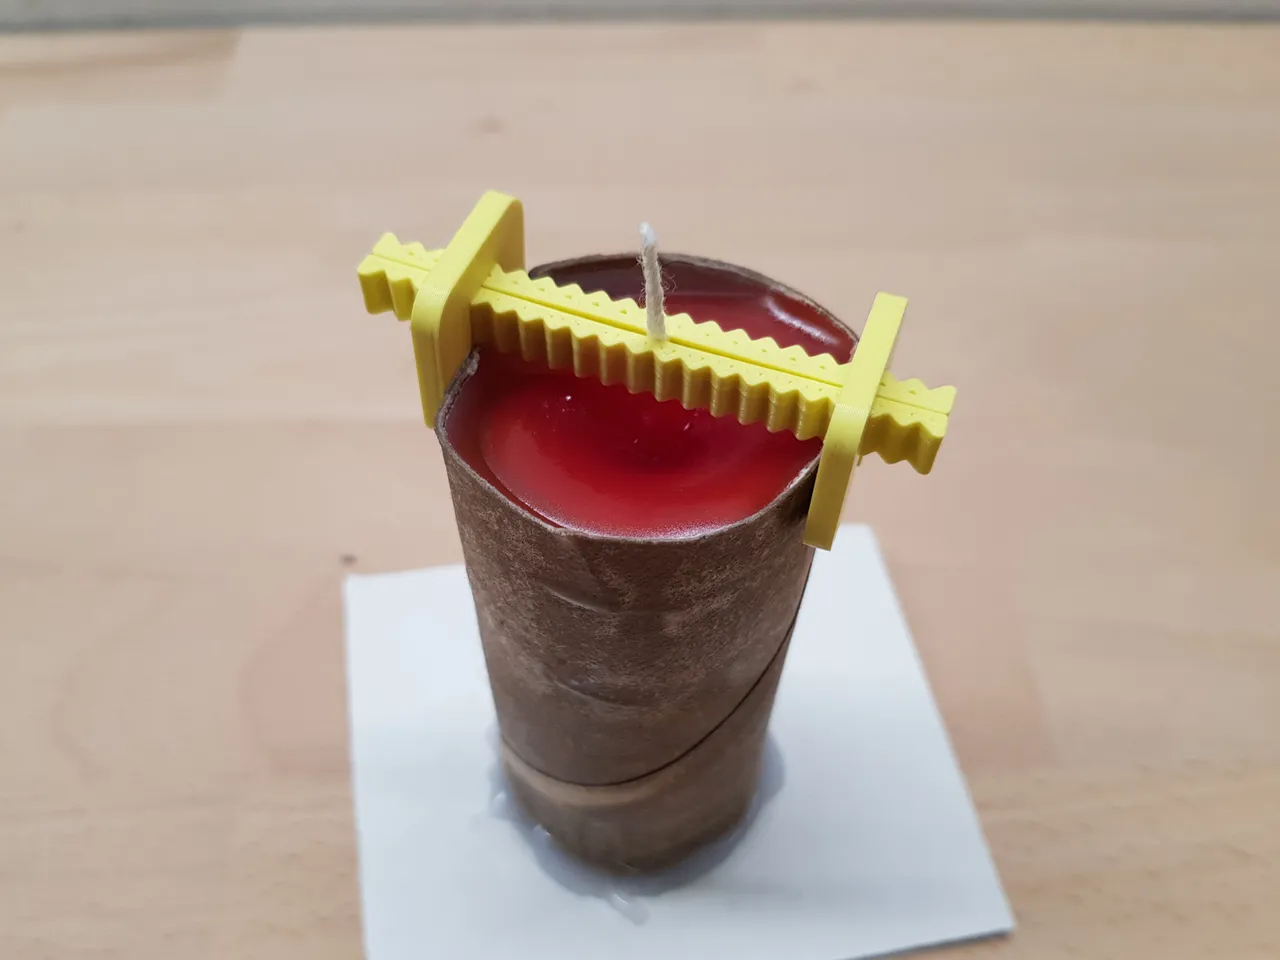 Wick Holder for Making Candles by Biomech